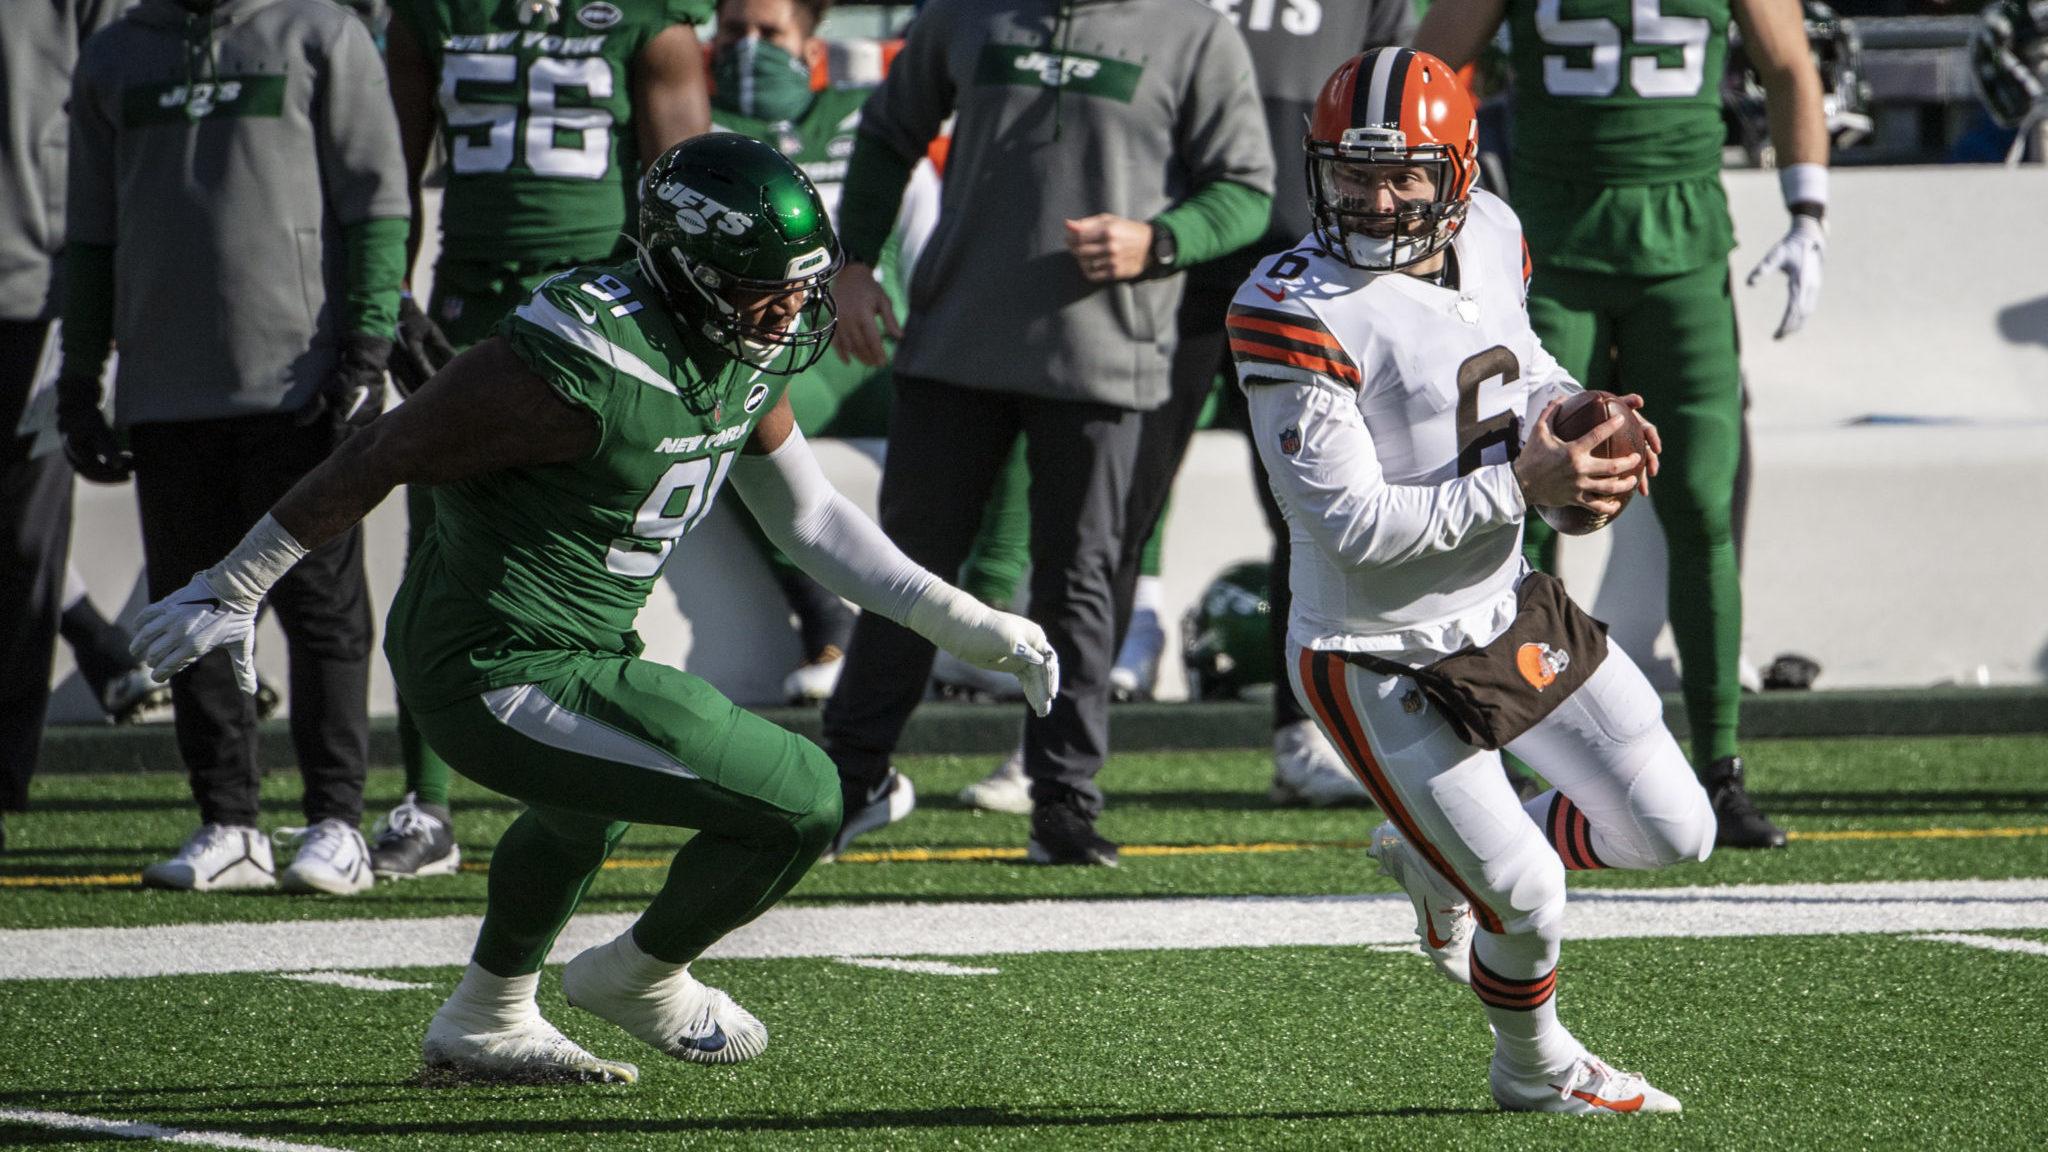 EAST RUTHERFORD, NJ - DECEMBER 27: Baker Mayfield #6 of the Cleveland Browns runs with the ball during a game against the New York Jets at MetLife Stadium on December 27, 2020 in East Rutherford, New Jersey.